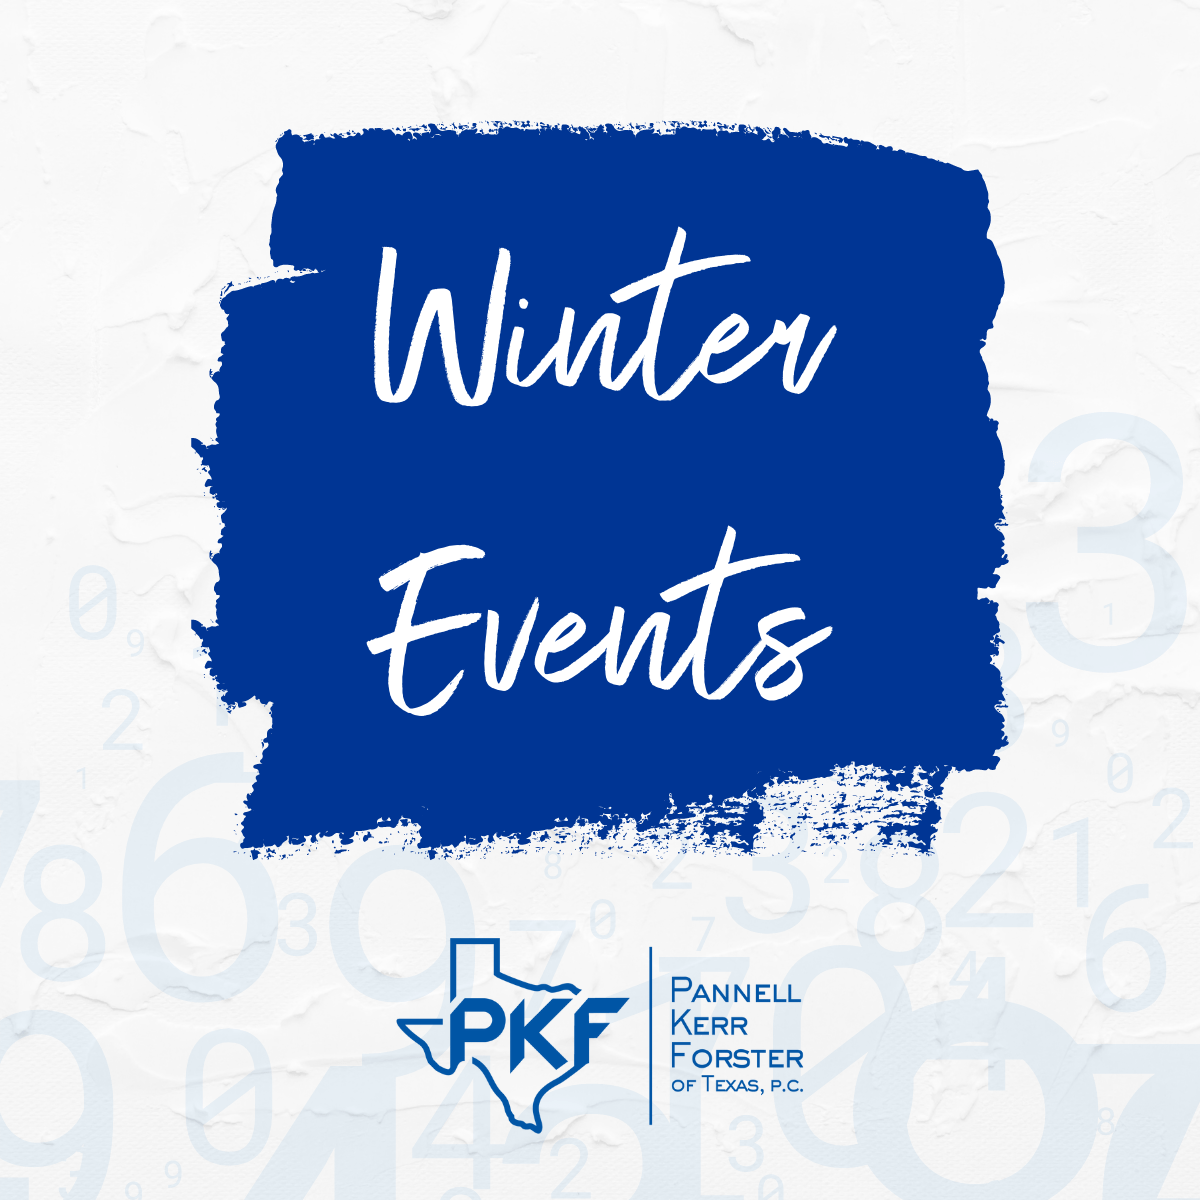 Mark Your Calendars! Upcoming Winter 2020 Houston Events…